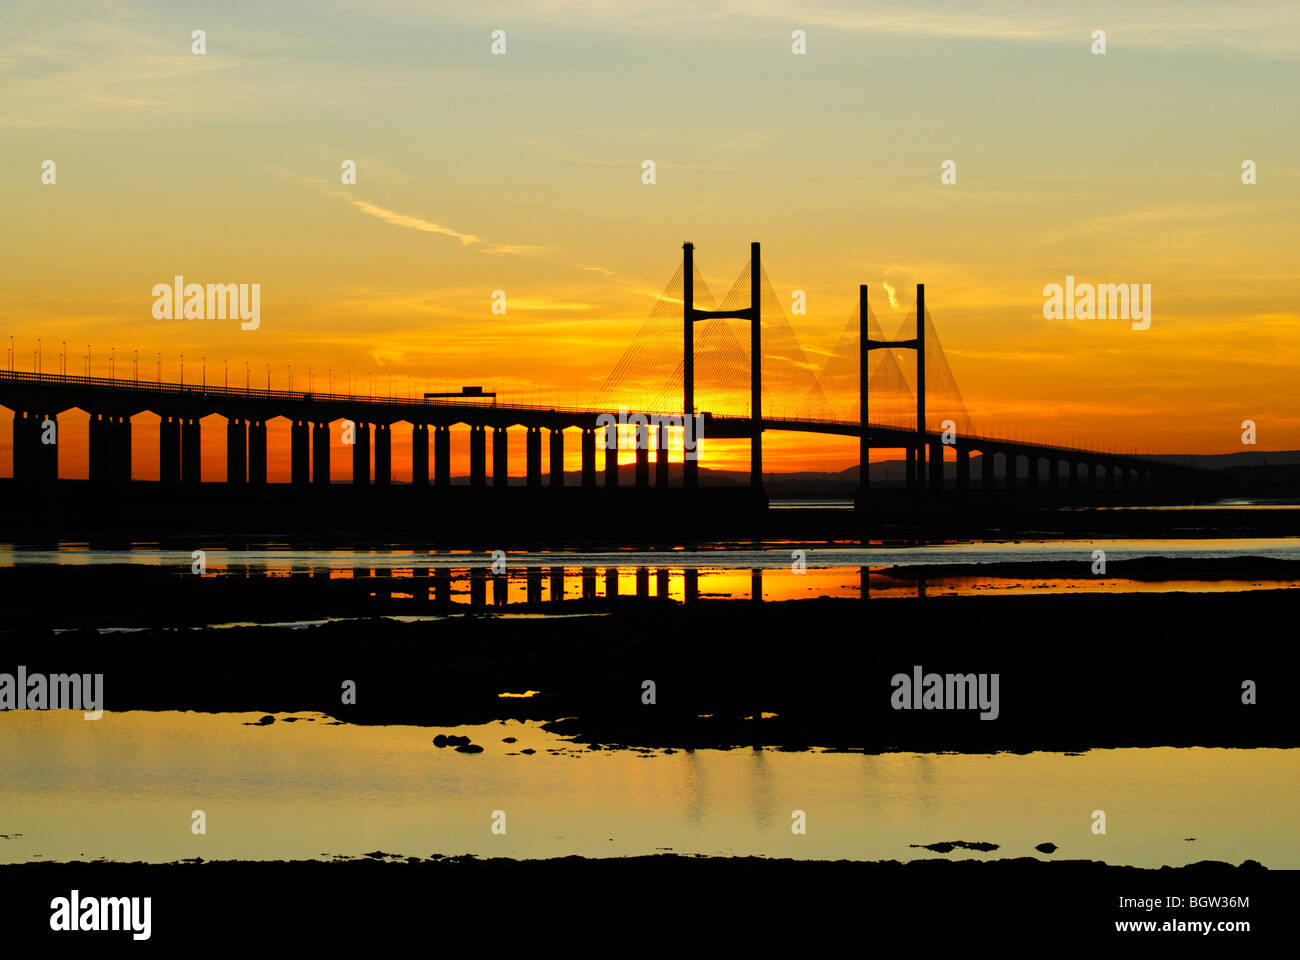 Second Severn crossing in silhouette with the sun setting behind it at dusk Stock Photo